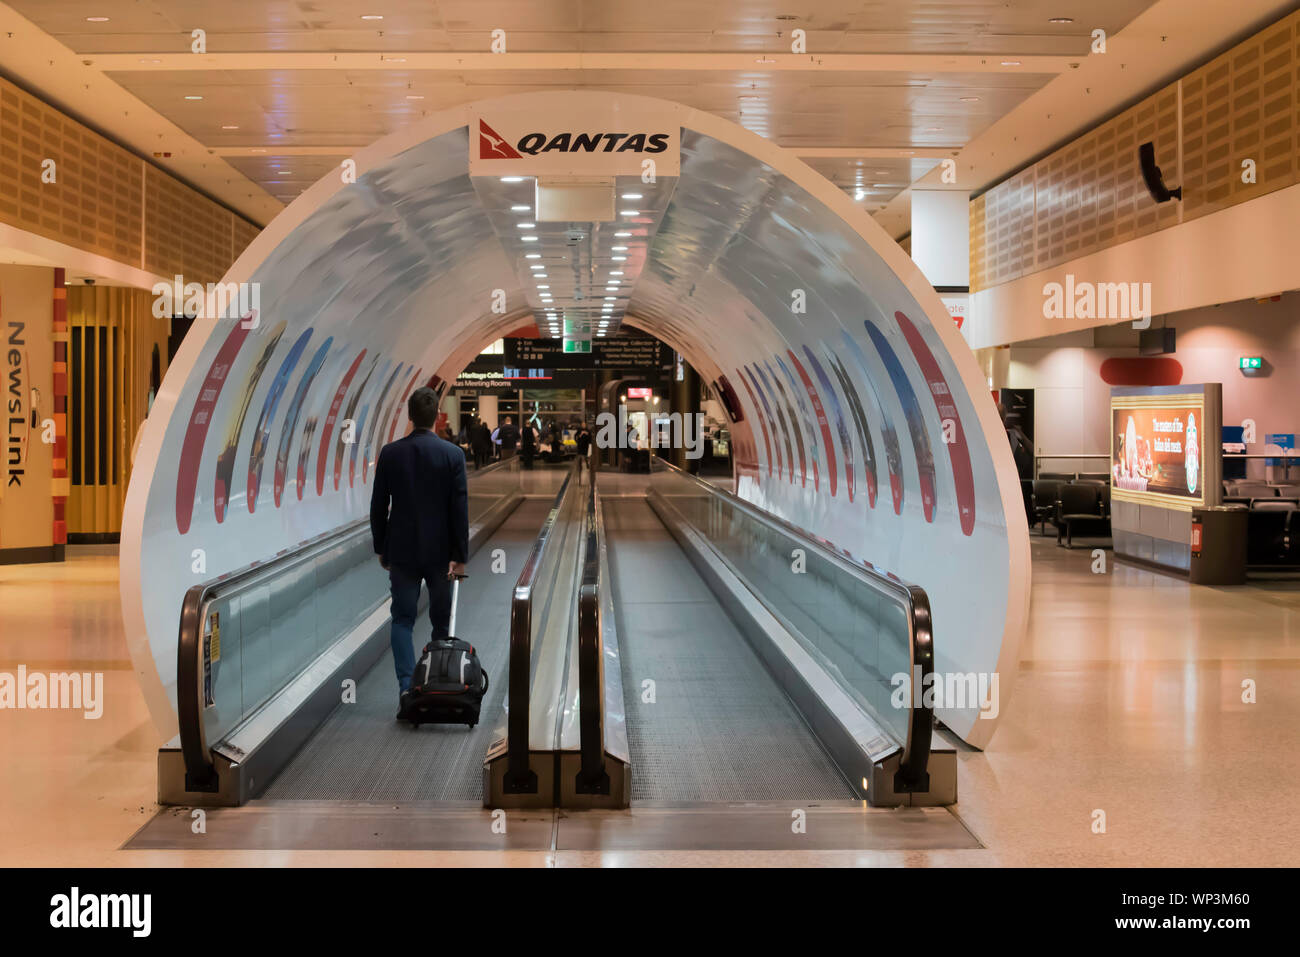 A traveler rides on a moving walkway in the Qantas Sydney Domestic Terminal covered by a fake Qantas jet airplane at Sydney's Kingsford Smith Airport Stock Photo